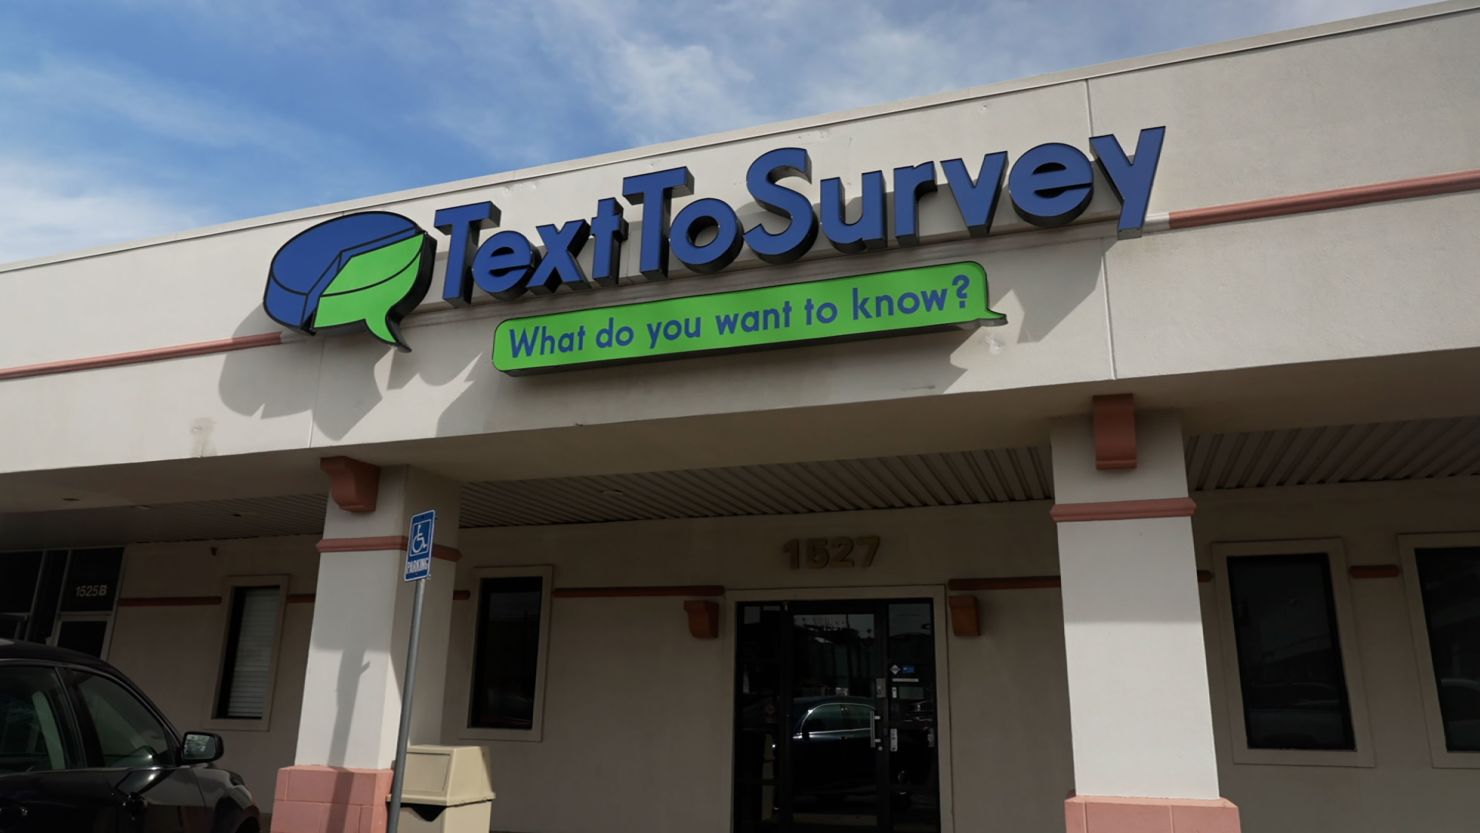 The Dallas-area strip mall office of the polling company TextToSurvey is also the office of Life Corporation, which authorities say was the source of a robocall imitating President Biden. Both companies are tied to serial entrepreneur Walter Monk.